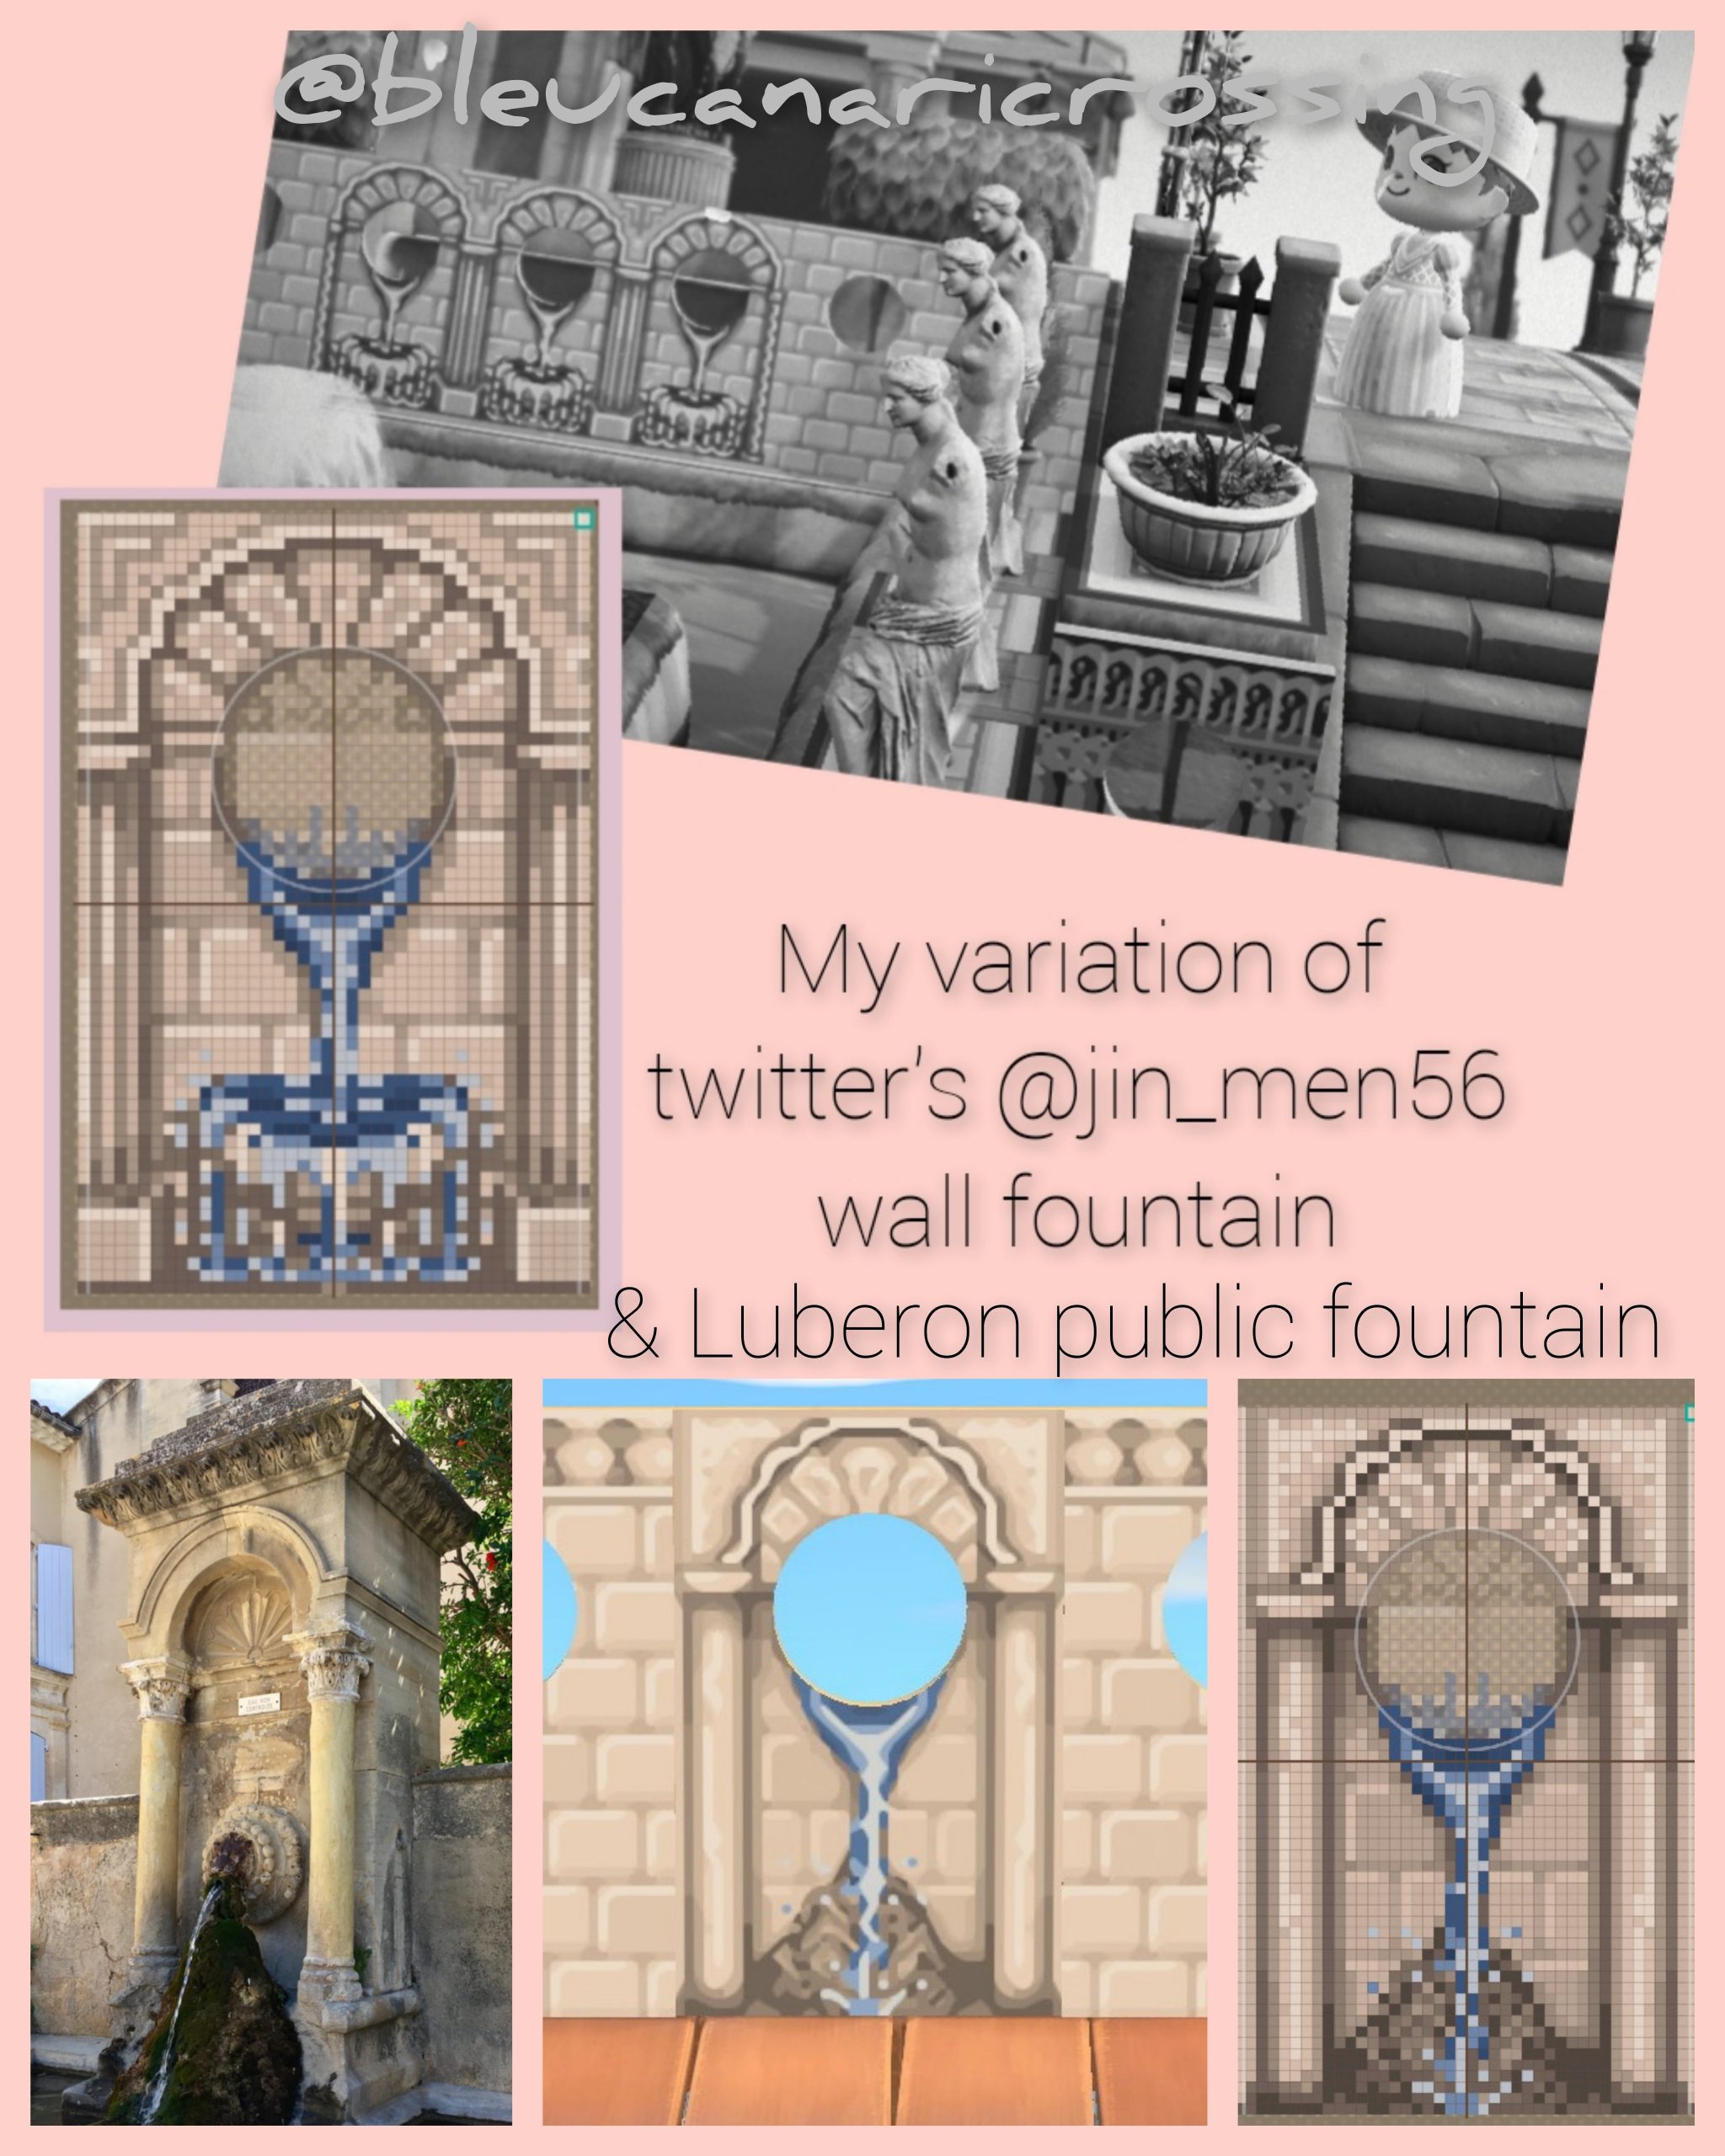 I created a standee fountain based on one from Luberon, and a wall fountain variation of the gorgeous one made by twitter@jin_men56. Ables is full, so here are my pixel designs. Please tag me if you use this (would love to see) and give credit back to the original artist?